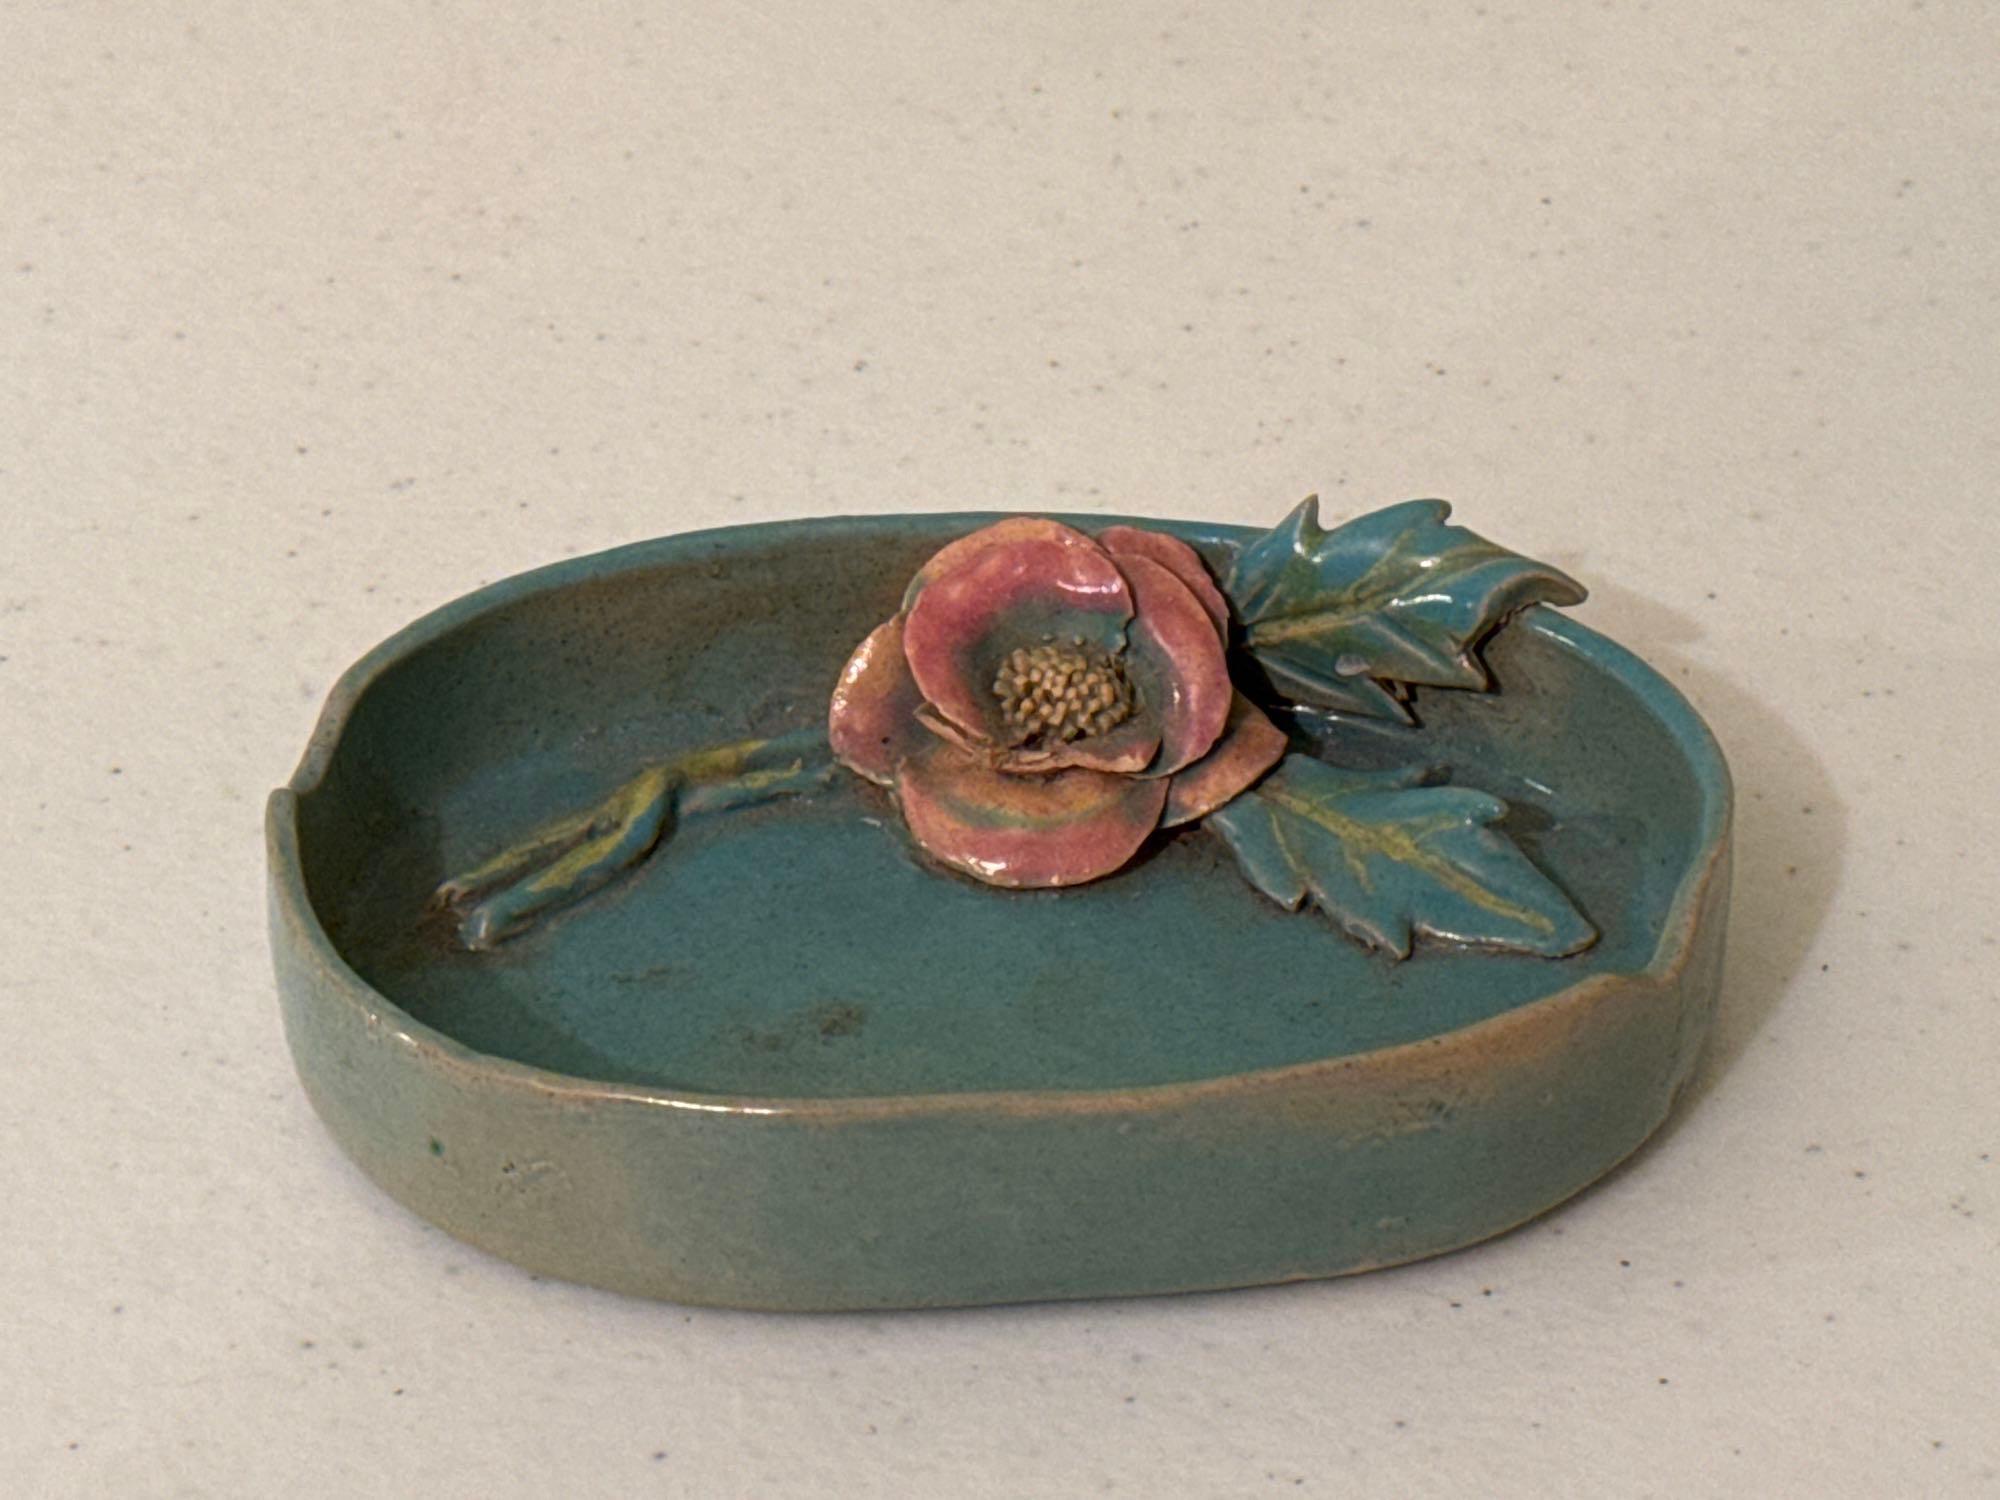 Antique Mirror, Blue Willow Candles, Geode Rock, Floral Frogs, Handmade Ash Tray & Shell Trays